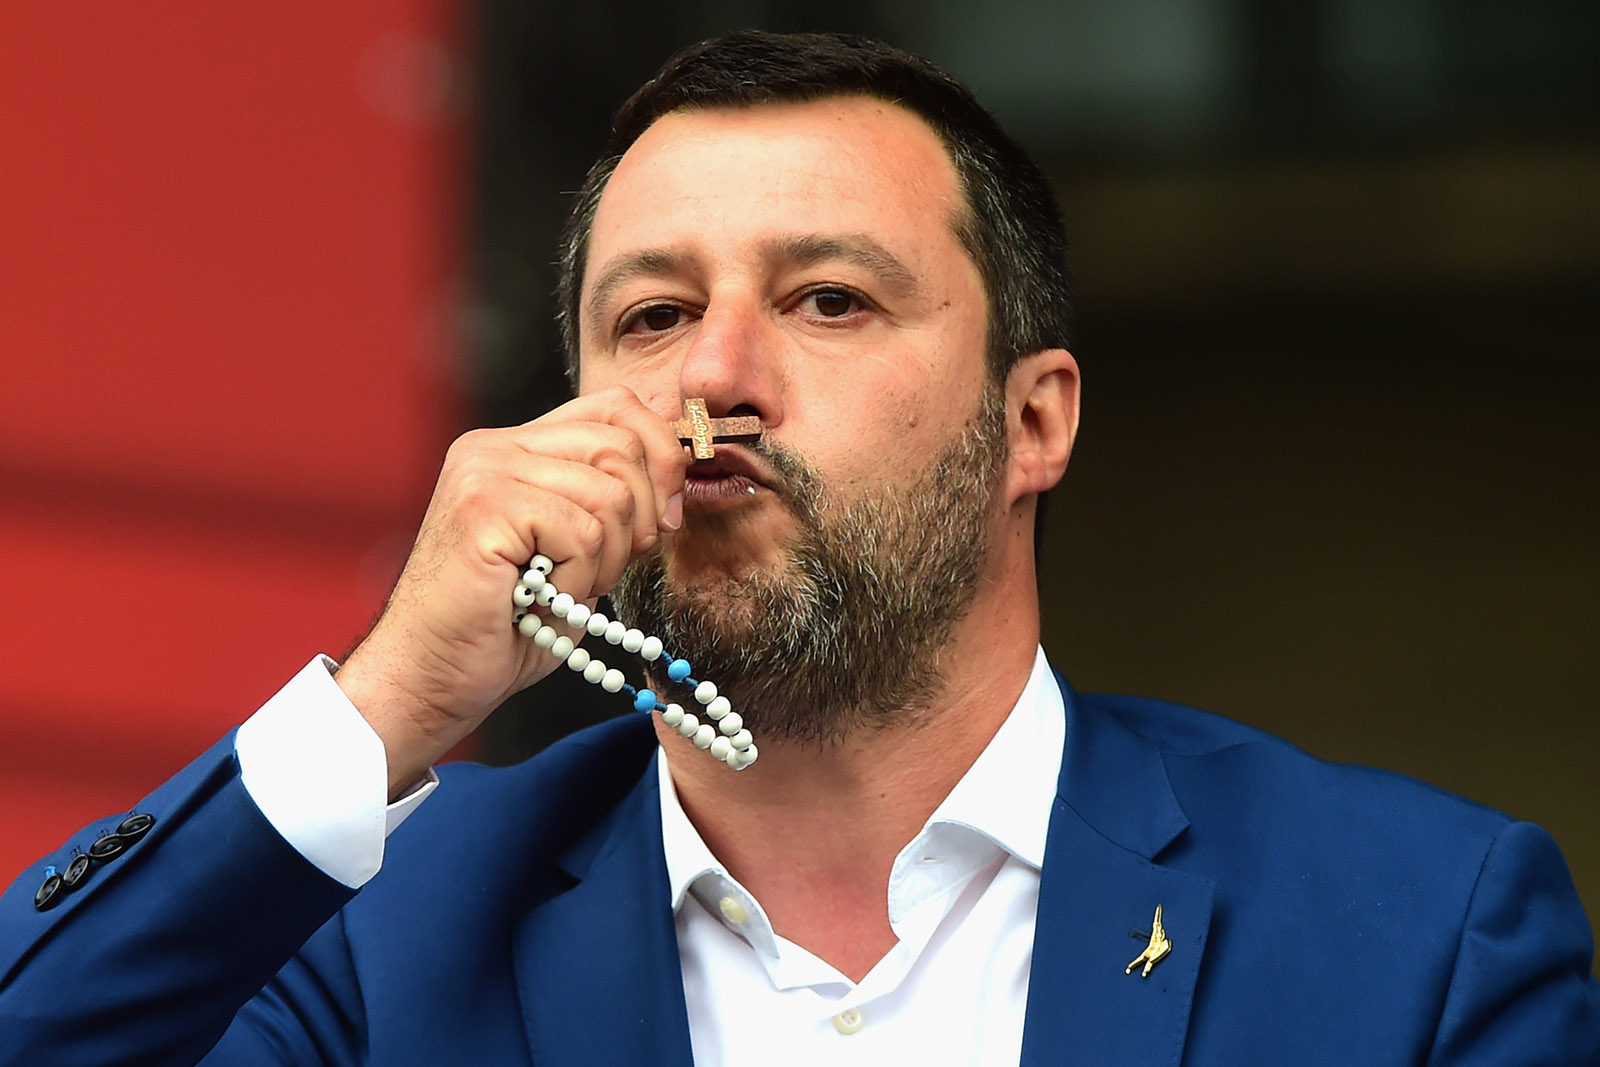 Leader of Italy’s Lega party Matteo Salvini kissing a rosary at a rally before the European elections, Milan, Italy, May 18, 2019